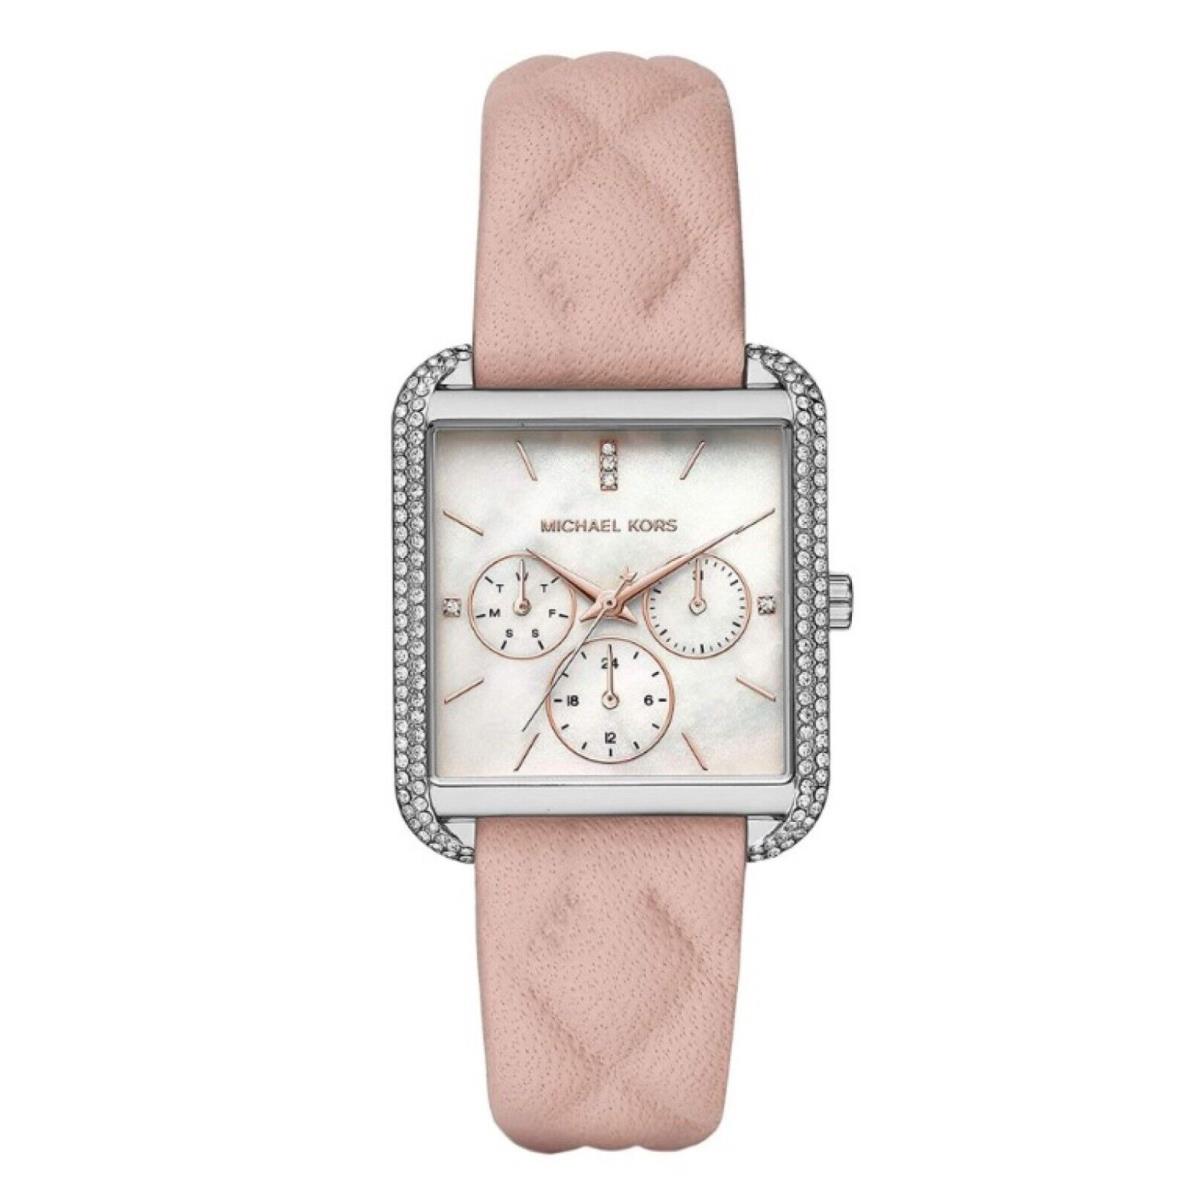 Michael Kors MK2768 Mother OF Pearl Chronograph Dial Pink Leather Womens Watch